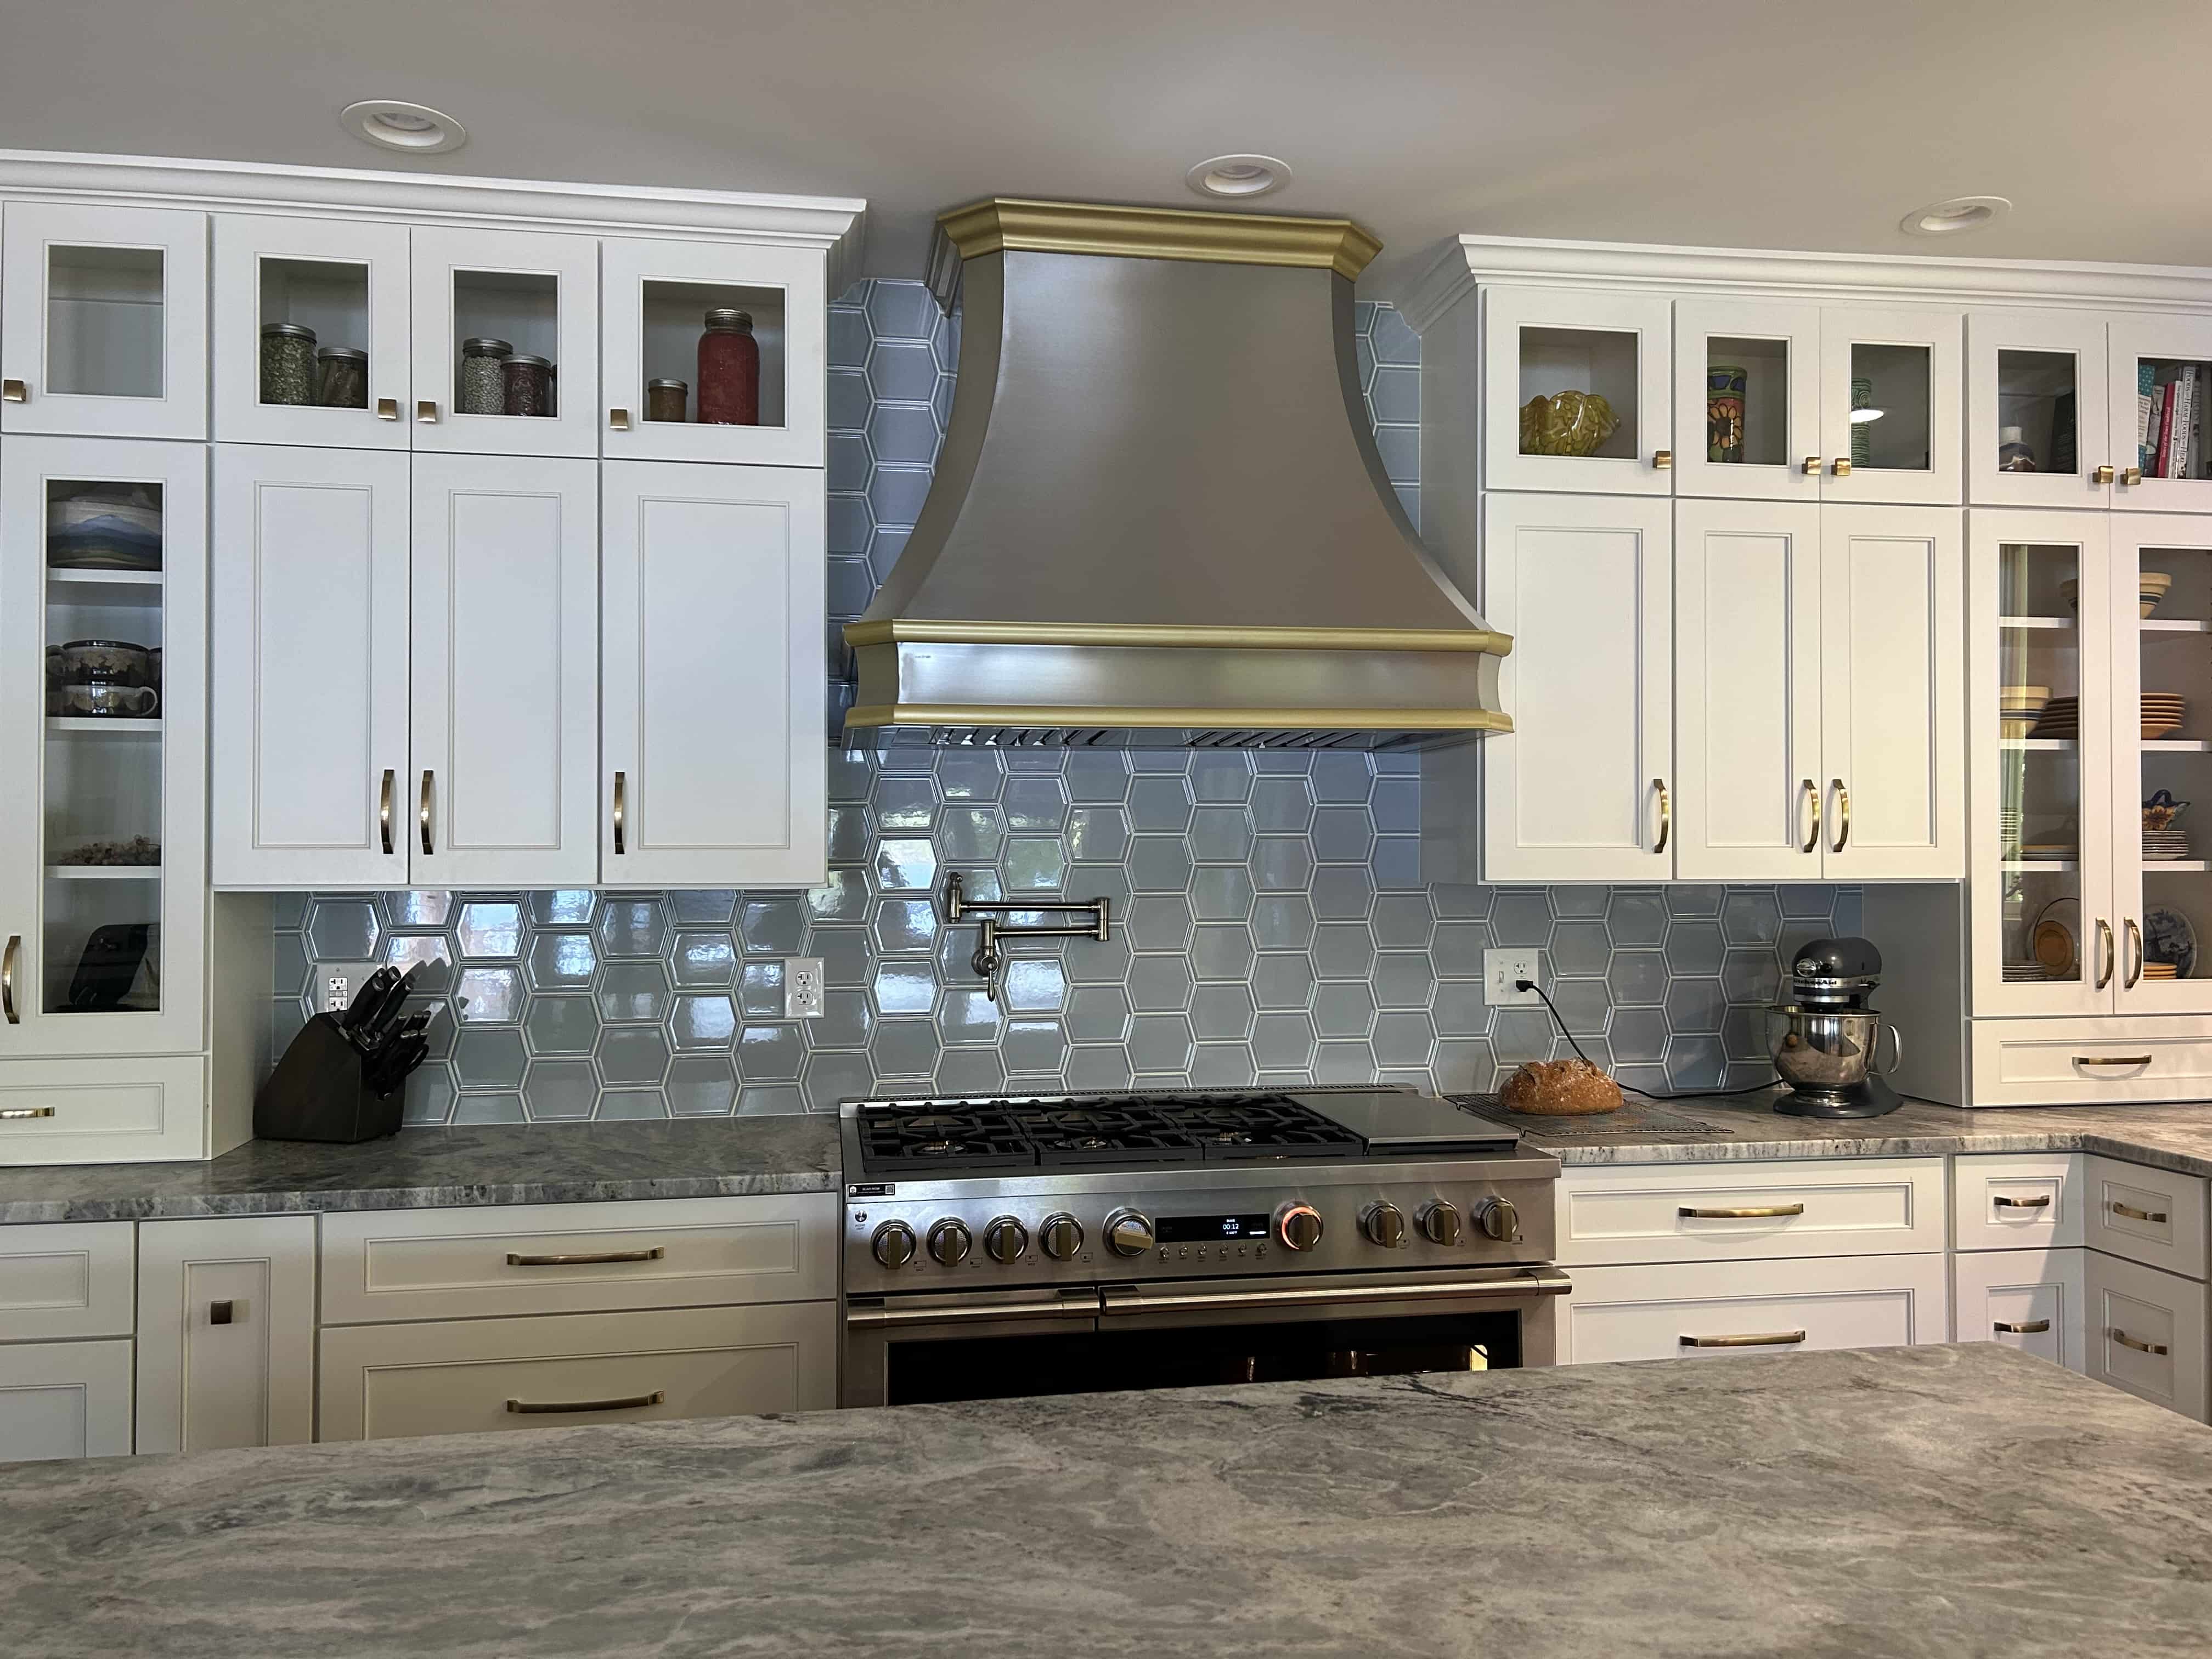 CopperSmith Classic CX9 Brushed Stainless Steel Kitchen Range Hood featuring white cabinets with gold details marble countertop and tile backsplash in a french style